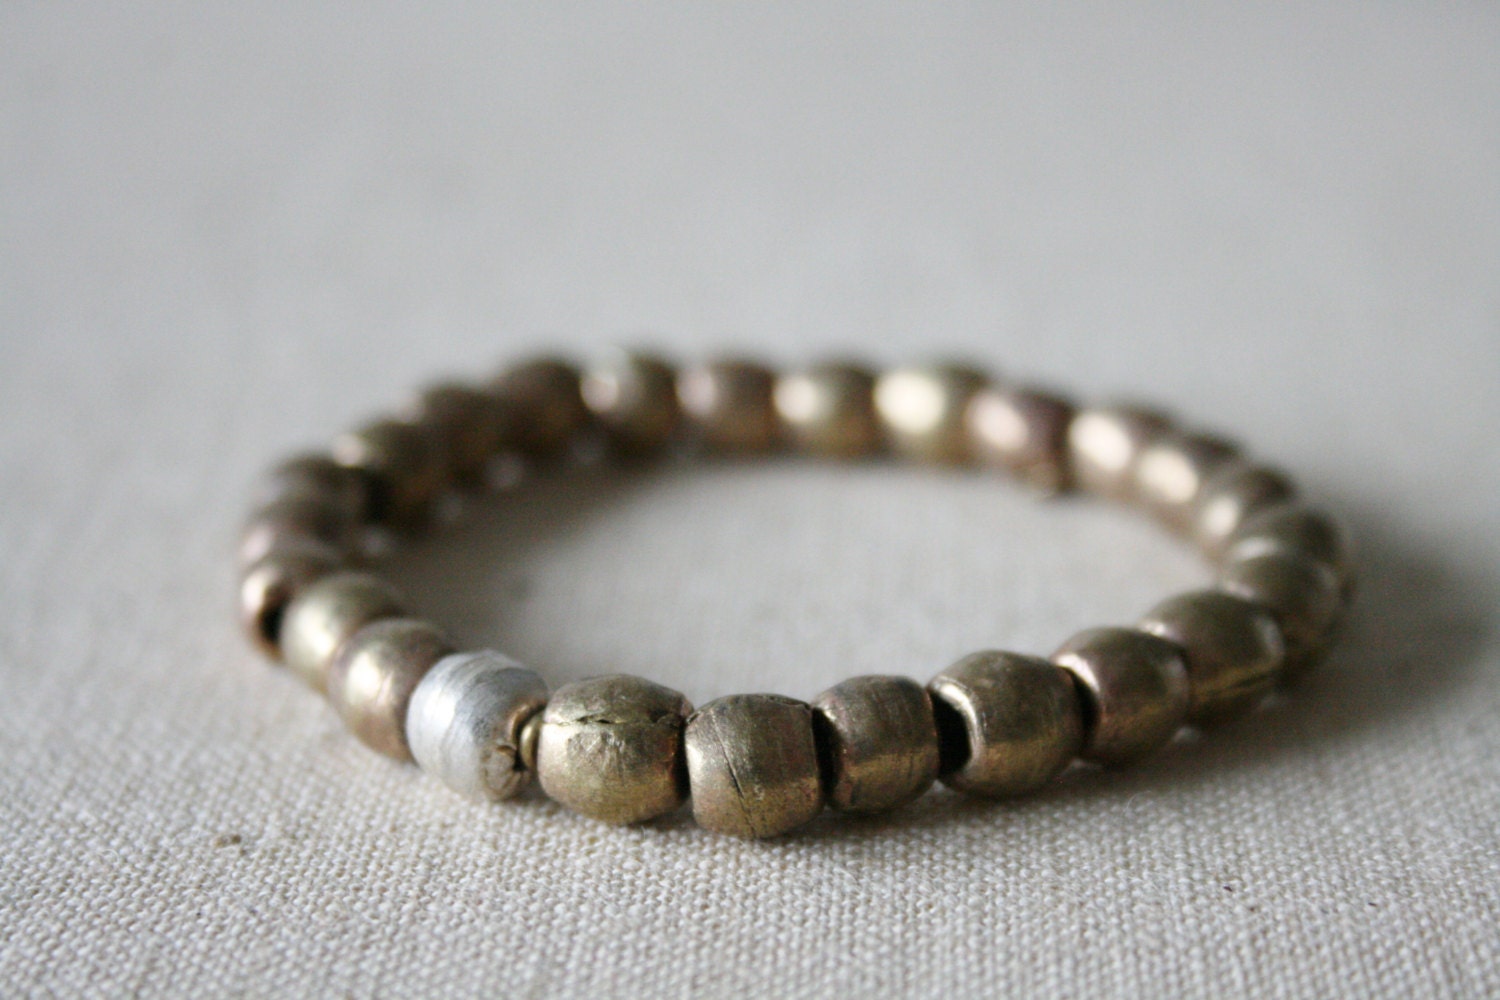 Ethiopian brass and silver bracelet // African // Bohemian // mixed metal // yoga mala // tribal // handmade // featured on front page - kisii